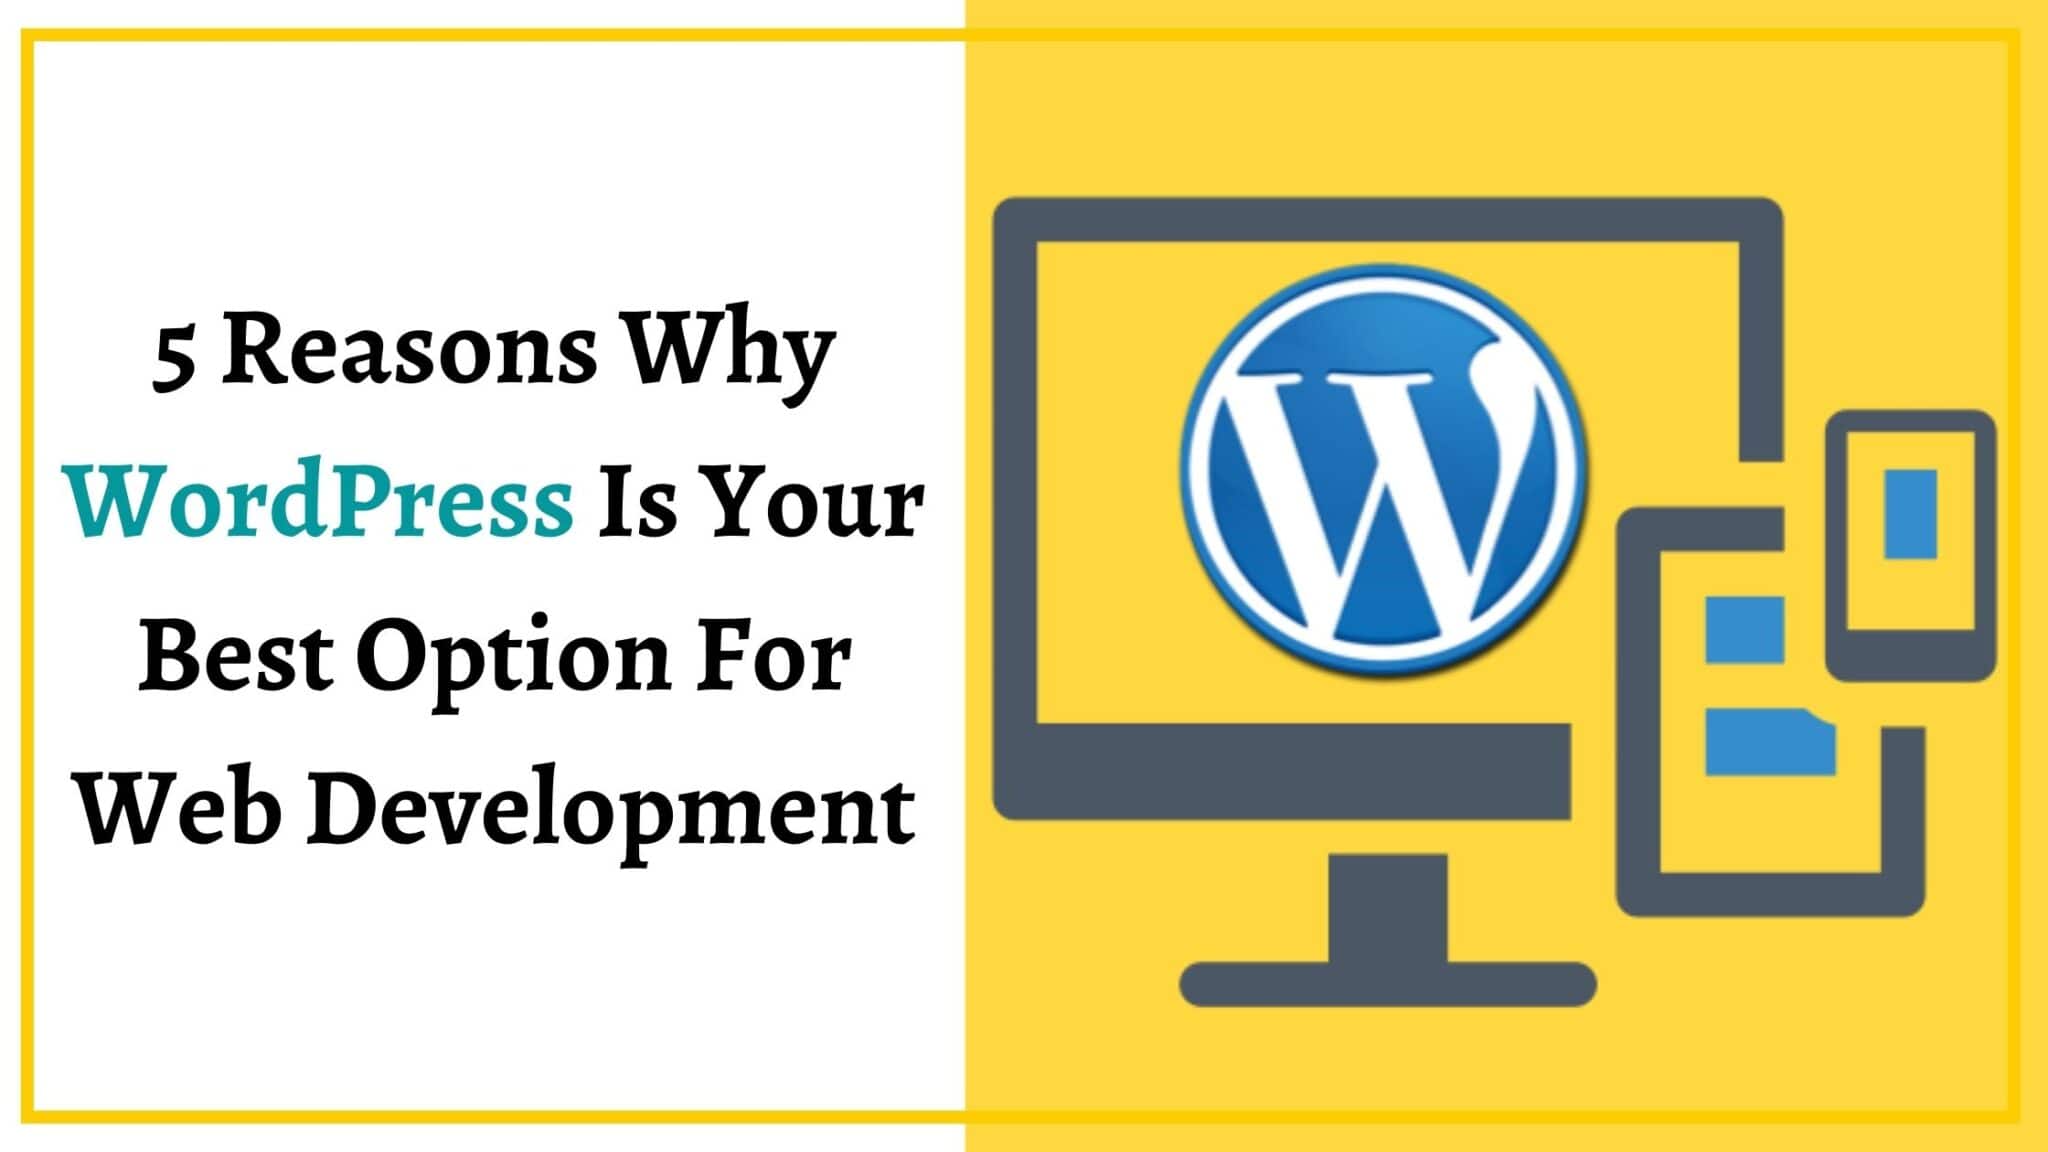 5 Reasons Why WordPress Is Your Best Option For Web Development-29ac977f